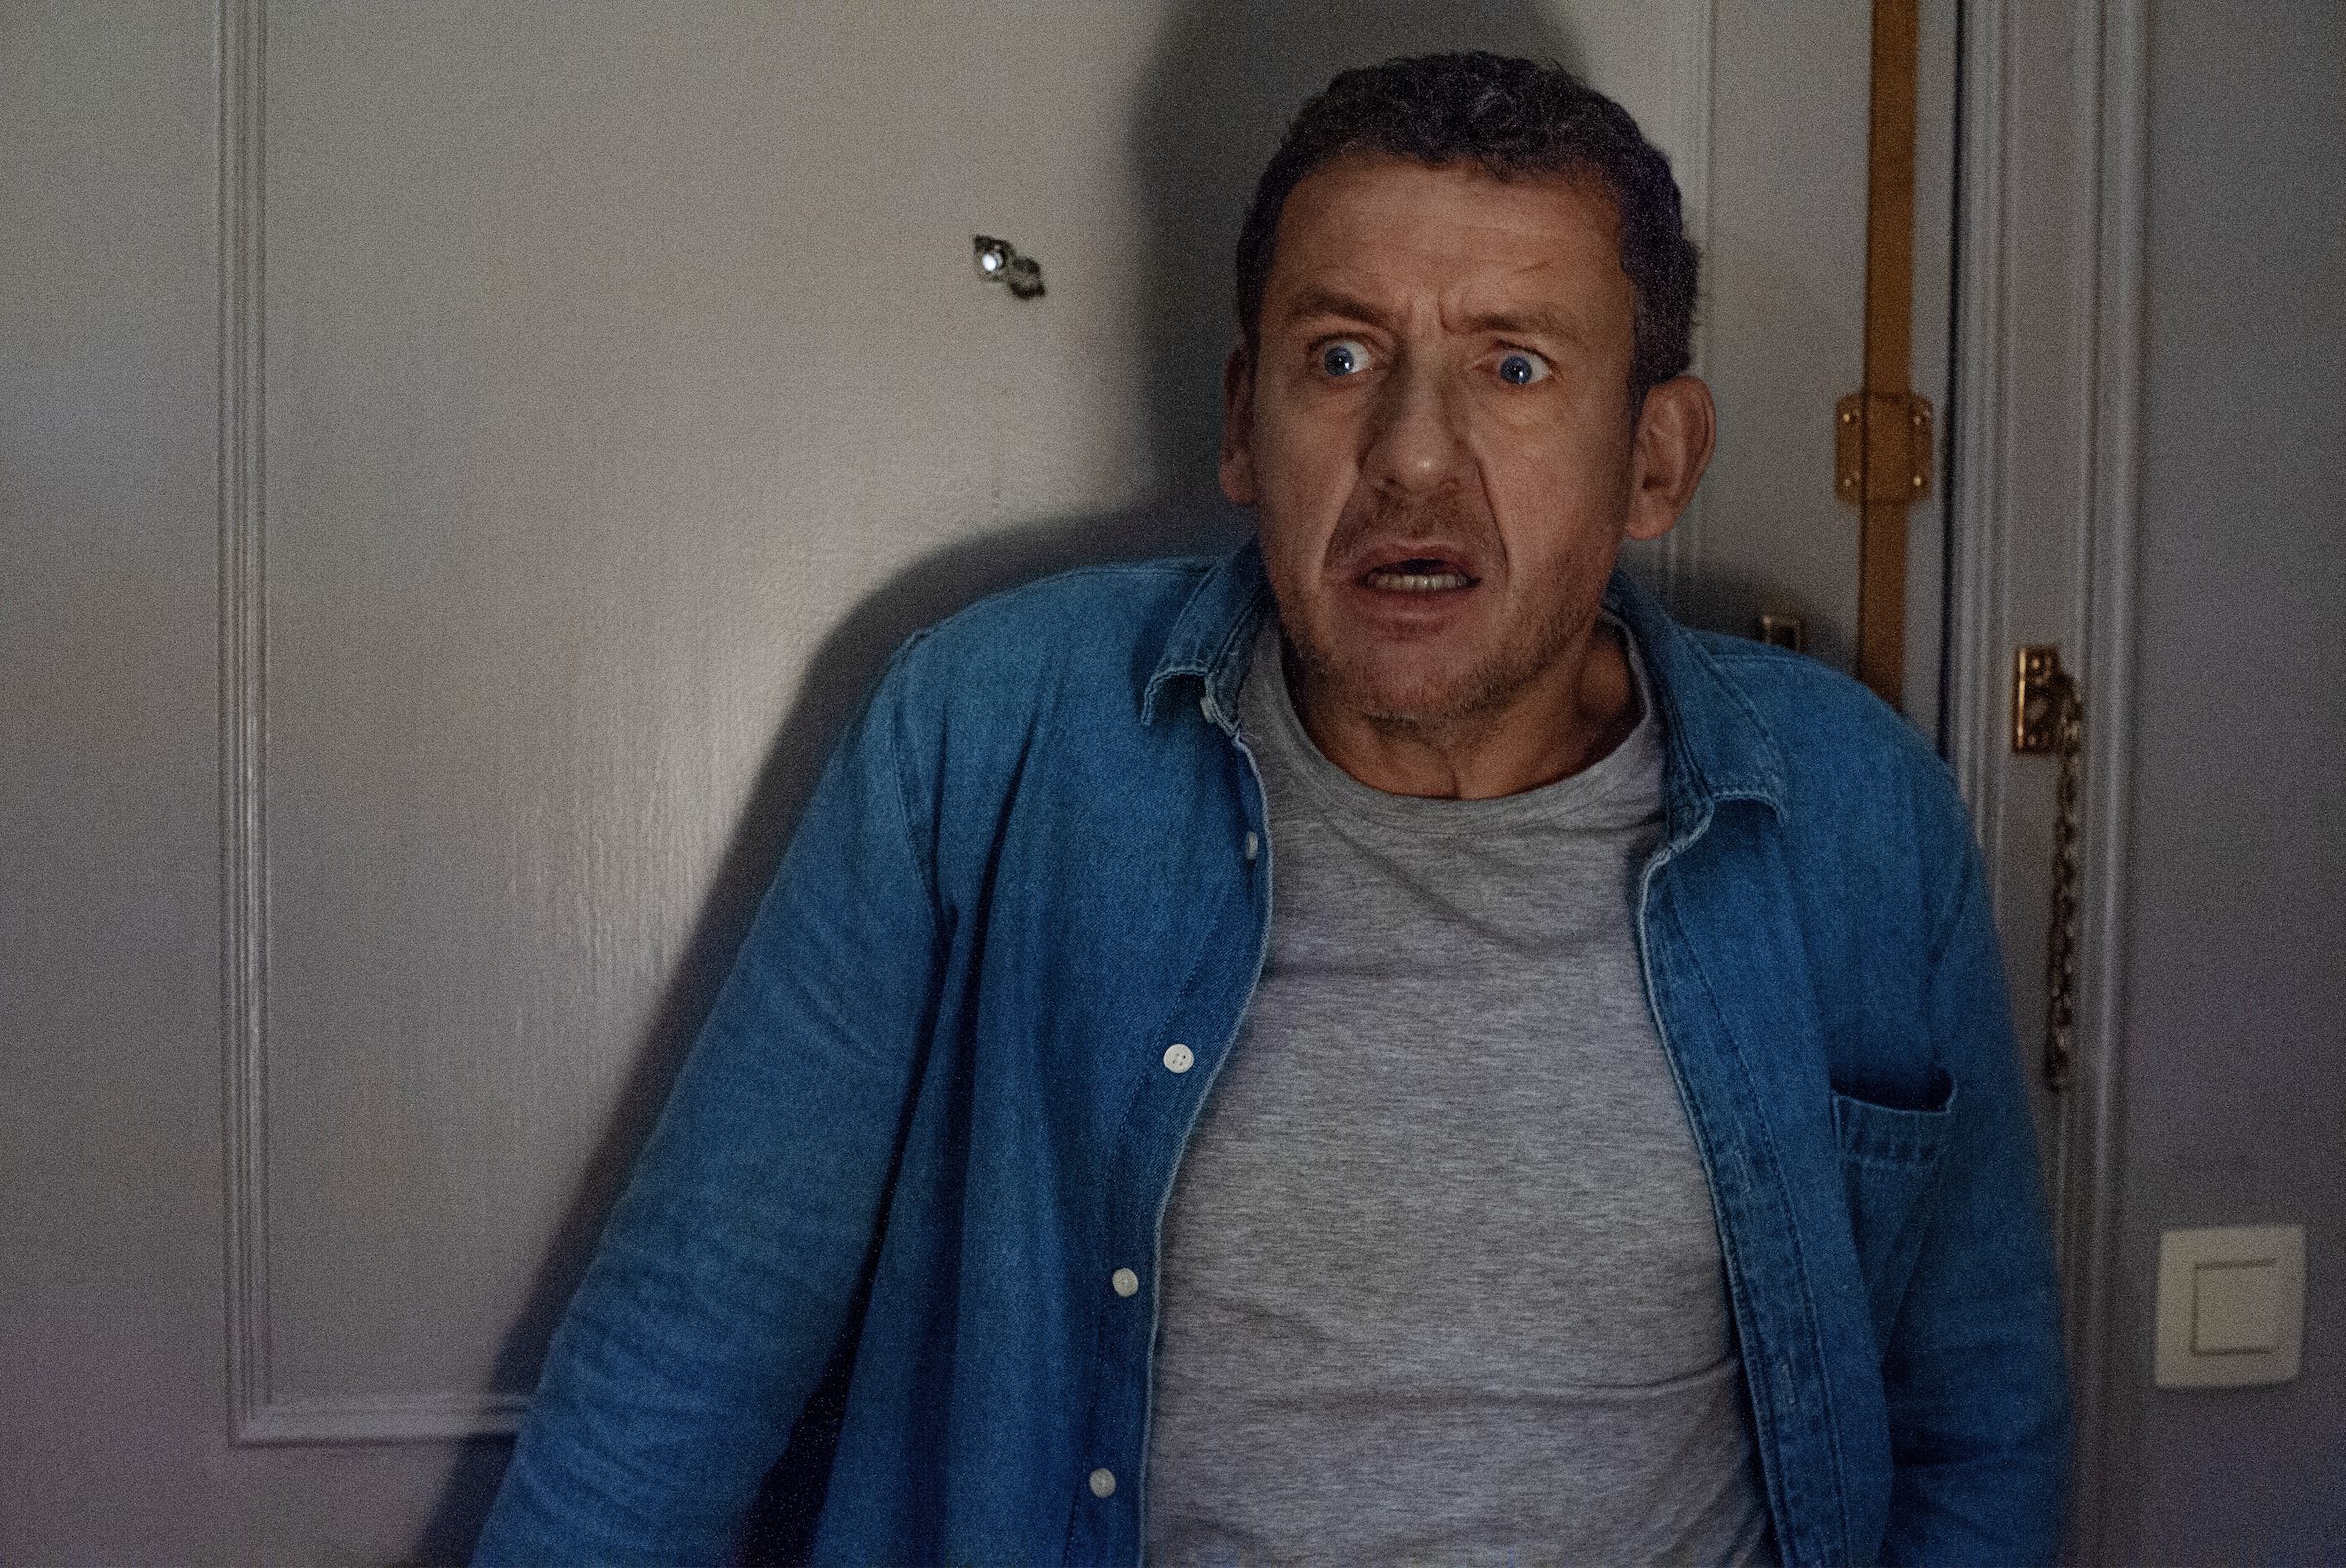 Stuck Together Cast - Dany Boon as Martin